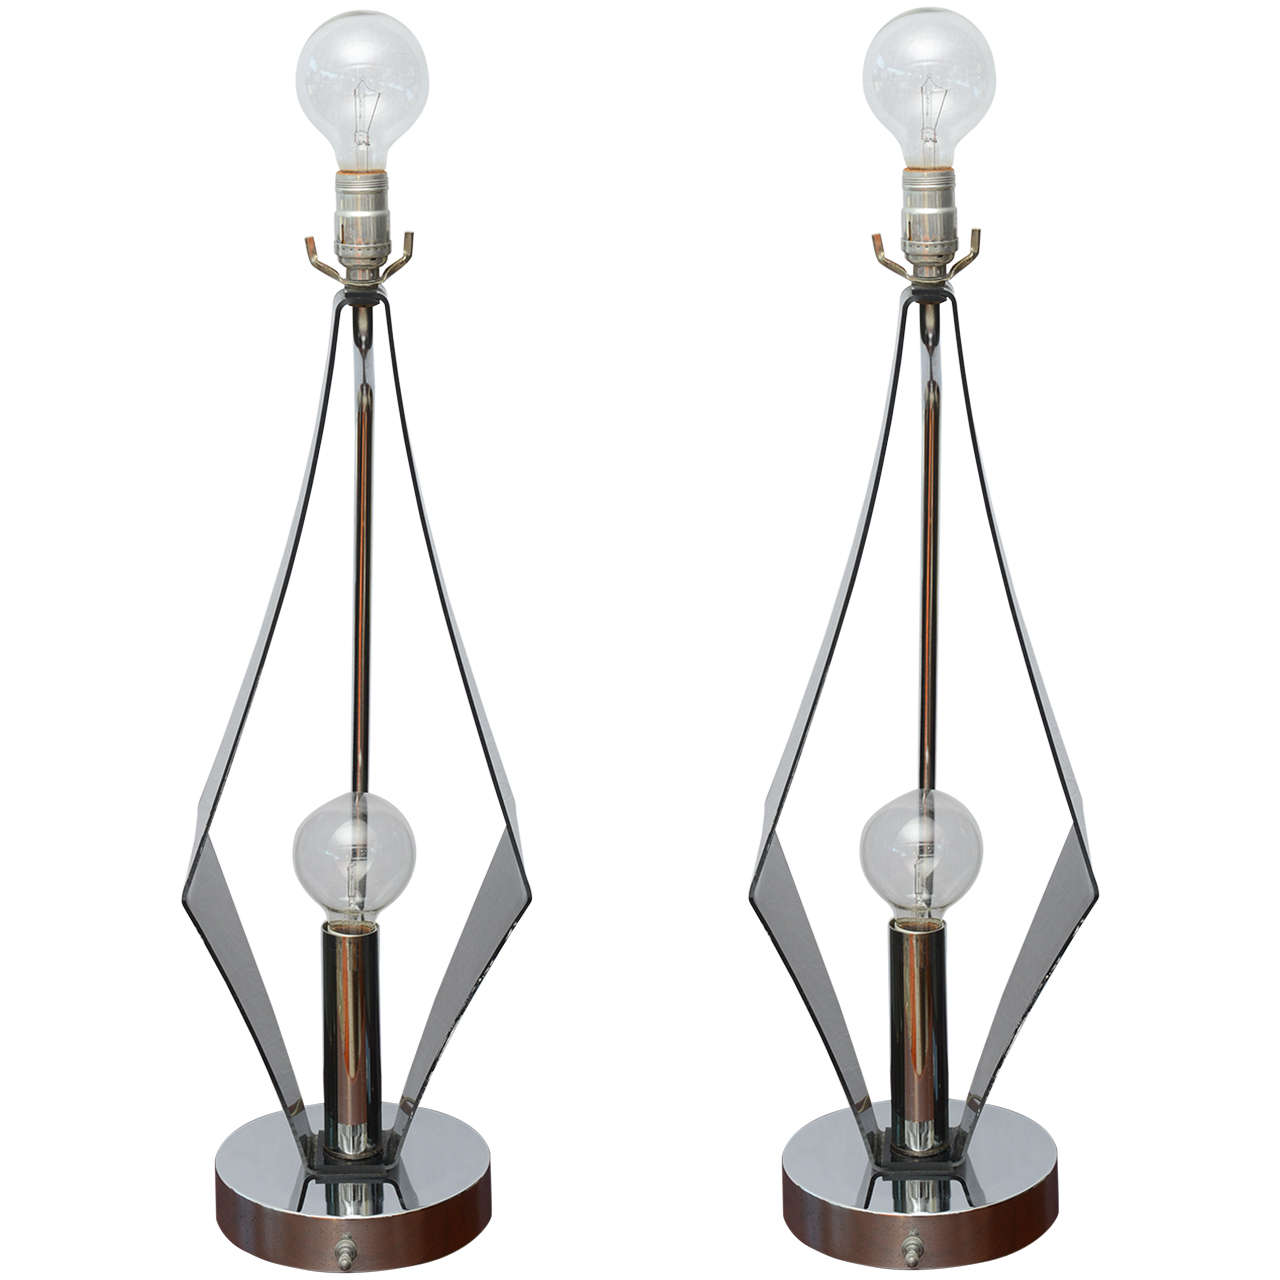 Pair of Double-Bulbed Geometric, Smoked Lucite and Chrome Lamps, 1970s USA